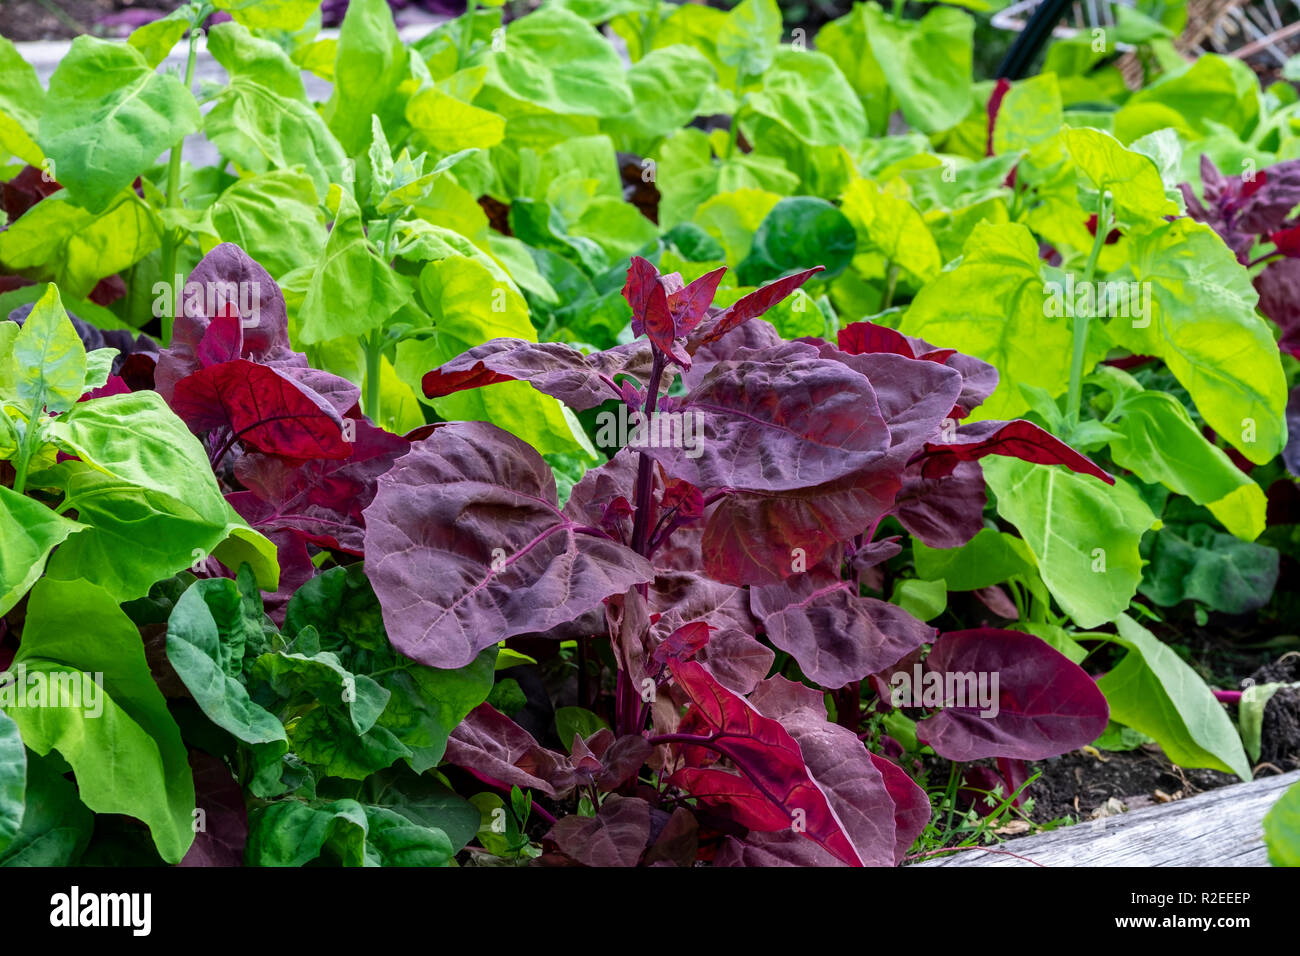 Green and red orach, atripex hortensis, a variety of saltbush related to spinach provide a contrasting colour splash in the vegetable garden. Stock Photo